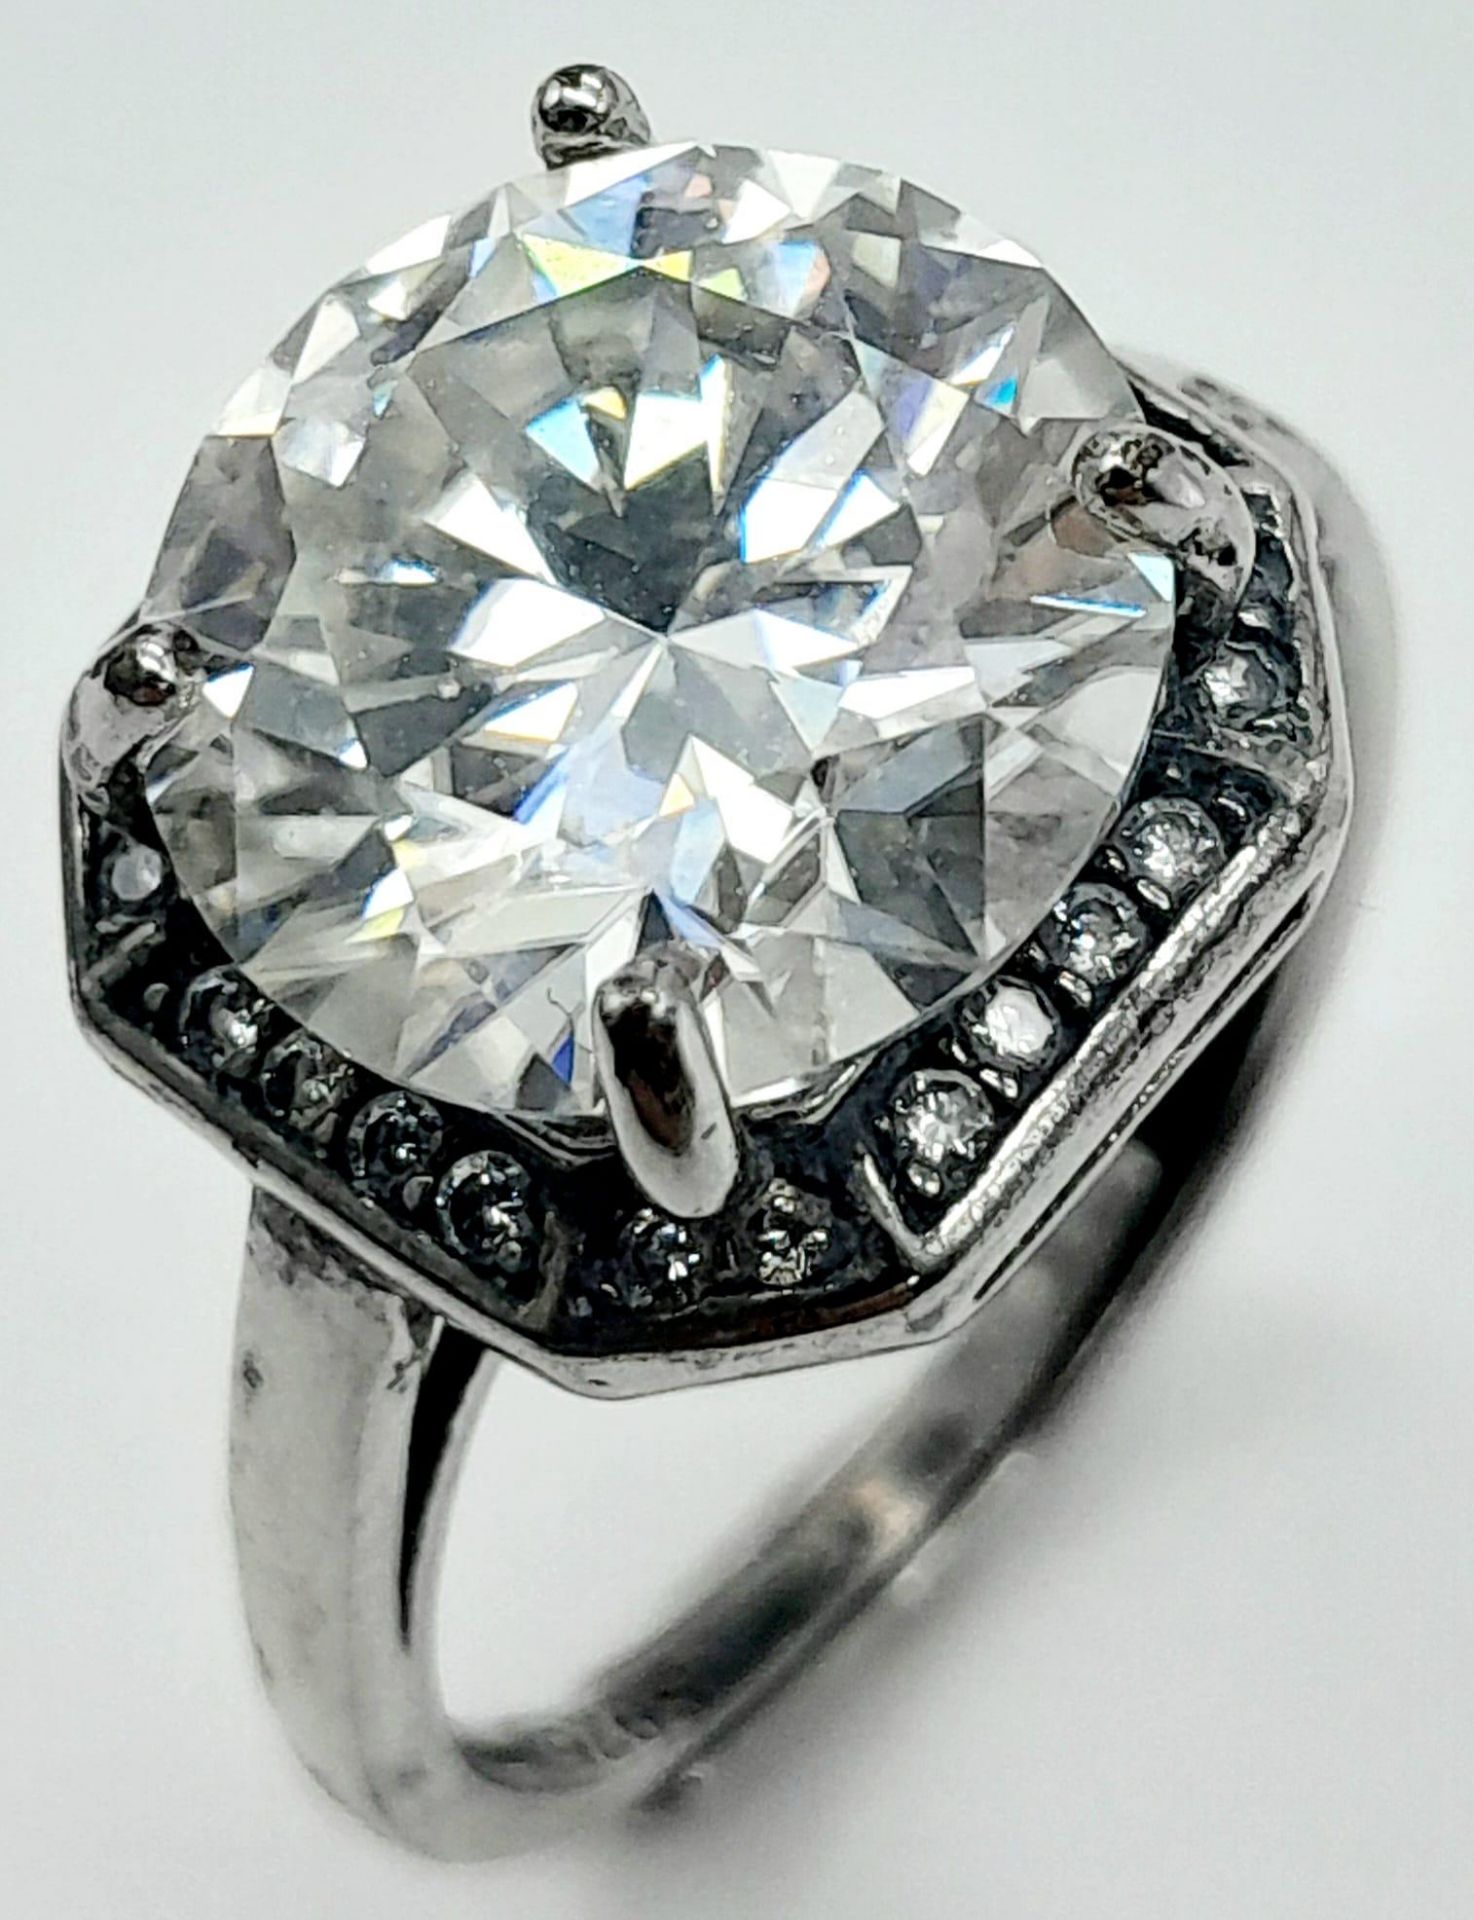 A 5ct Brilliant Round Cut White Moissanite Ring - Set in 925 silver. Size M. Comes with a GRA